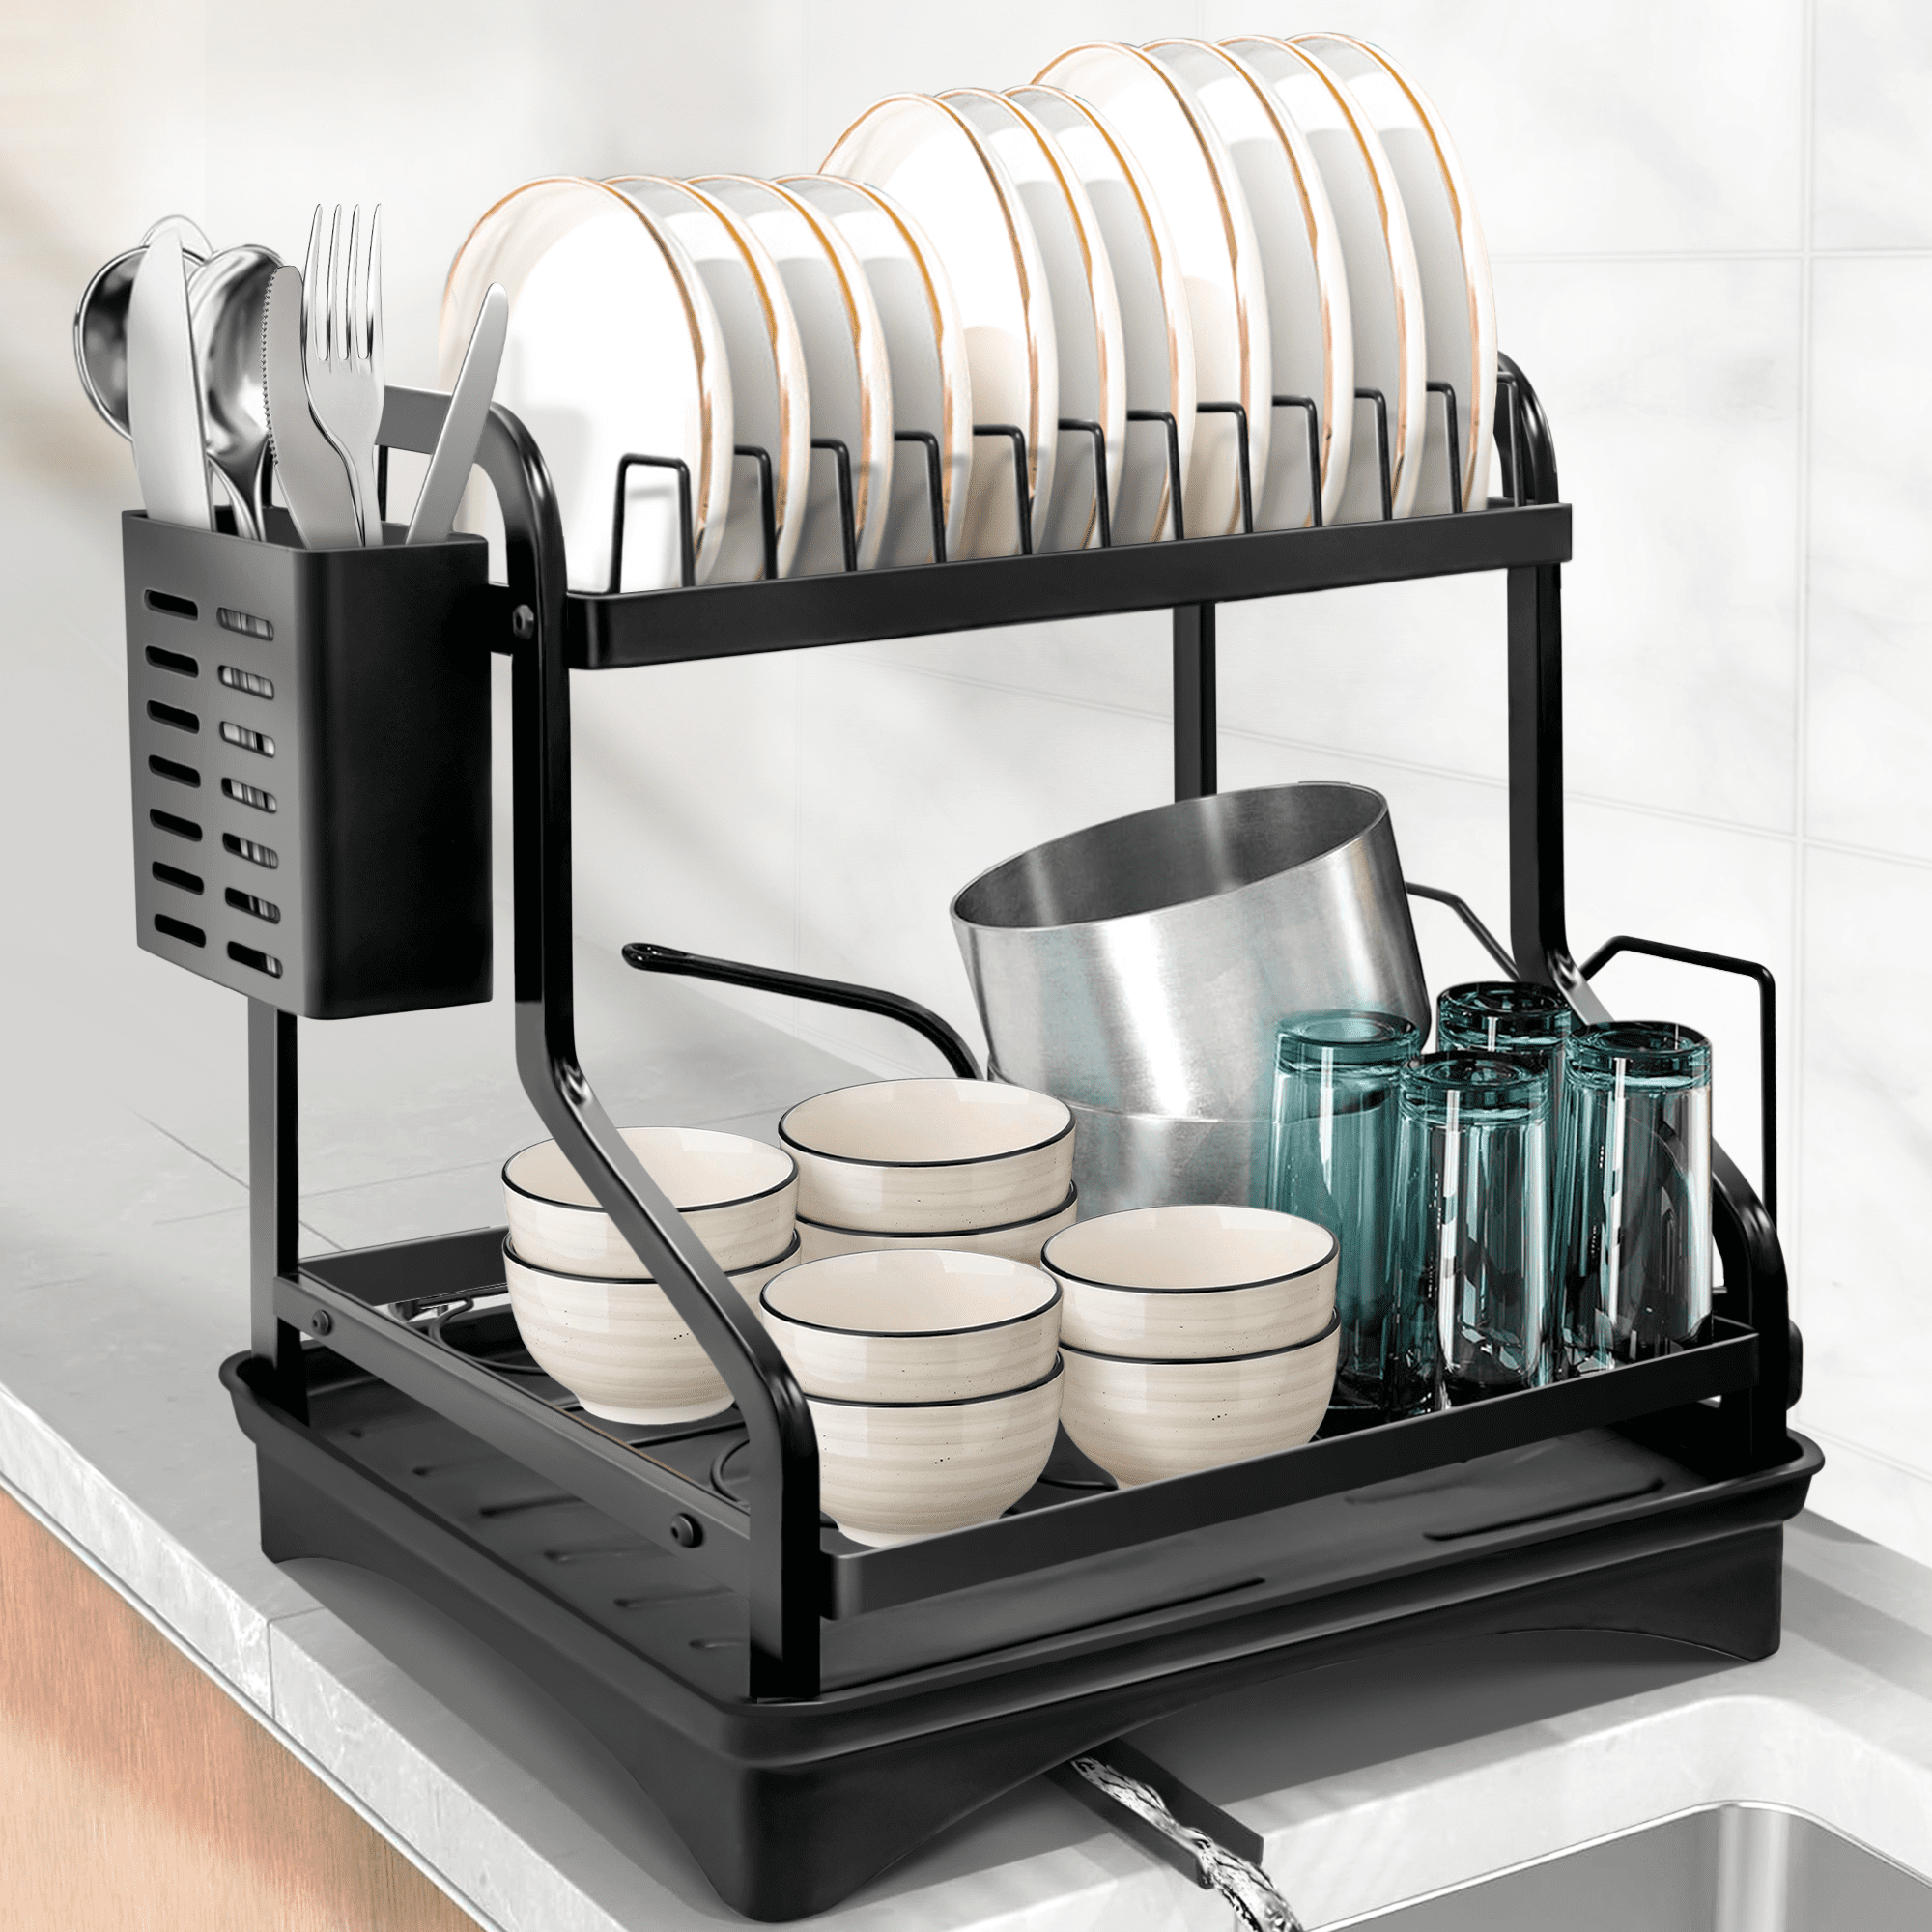  Qienrrae Dish Drying Racks for Kitchen Counter, Stainless  Steel 2 Tier Black Dish Dryer Rack with Drainboard Set, Large Dish Drainers  with Wine Glass & Utensil Holder and Dryer Mat